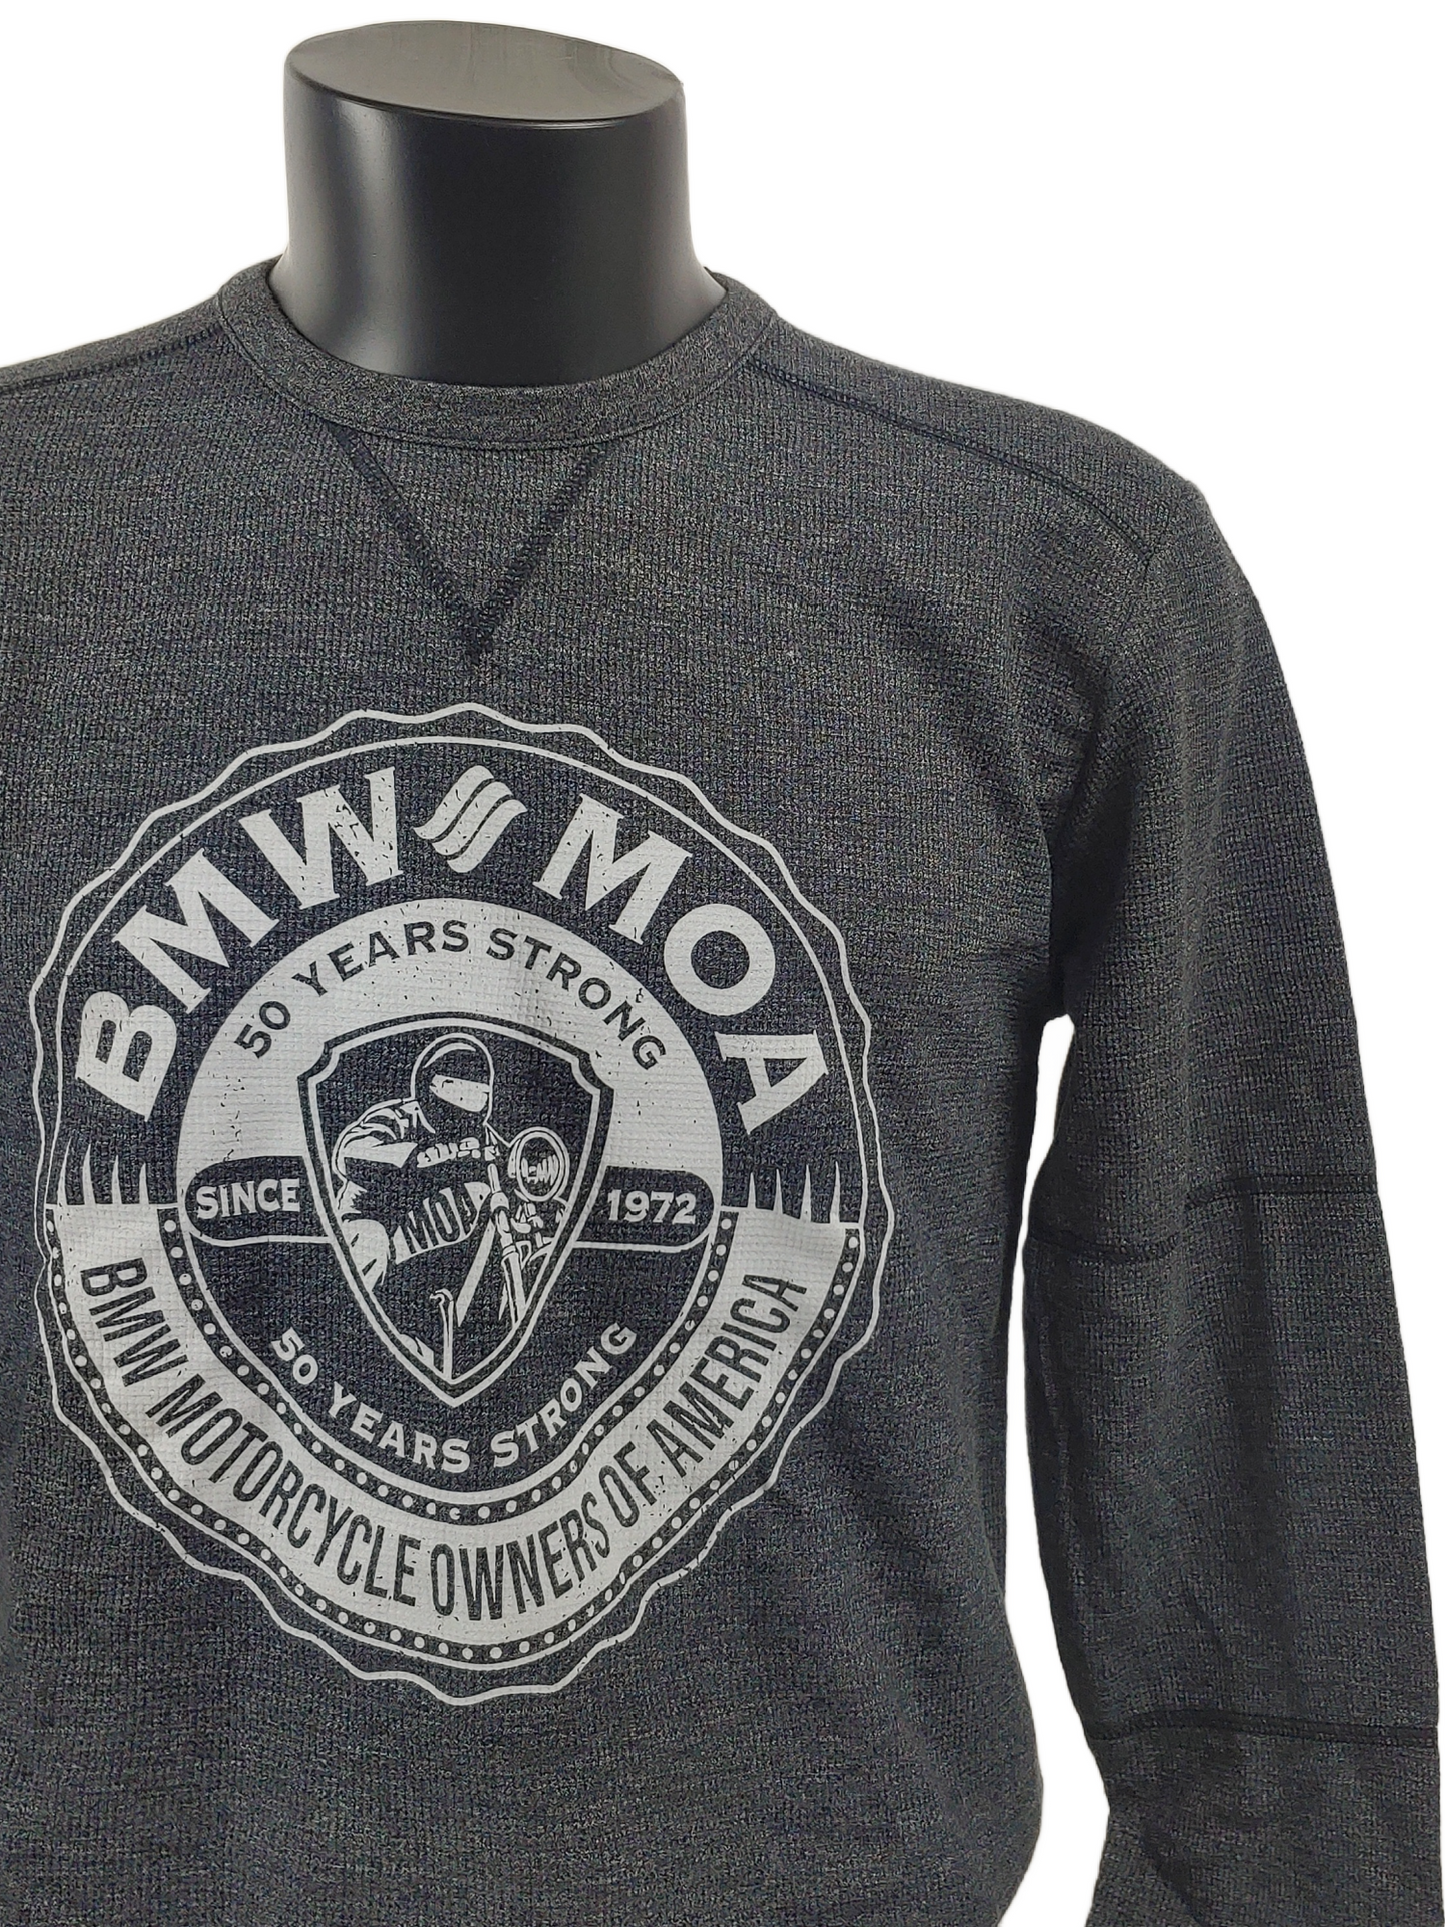 BMW MOA - Charcoal- Unisex - Long Sleeve Thermal